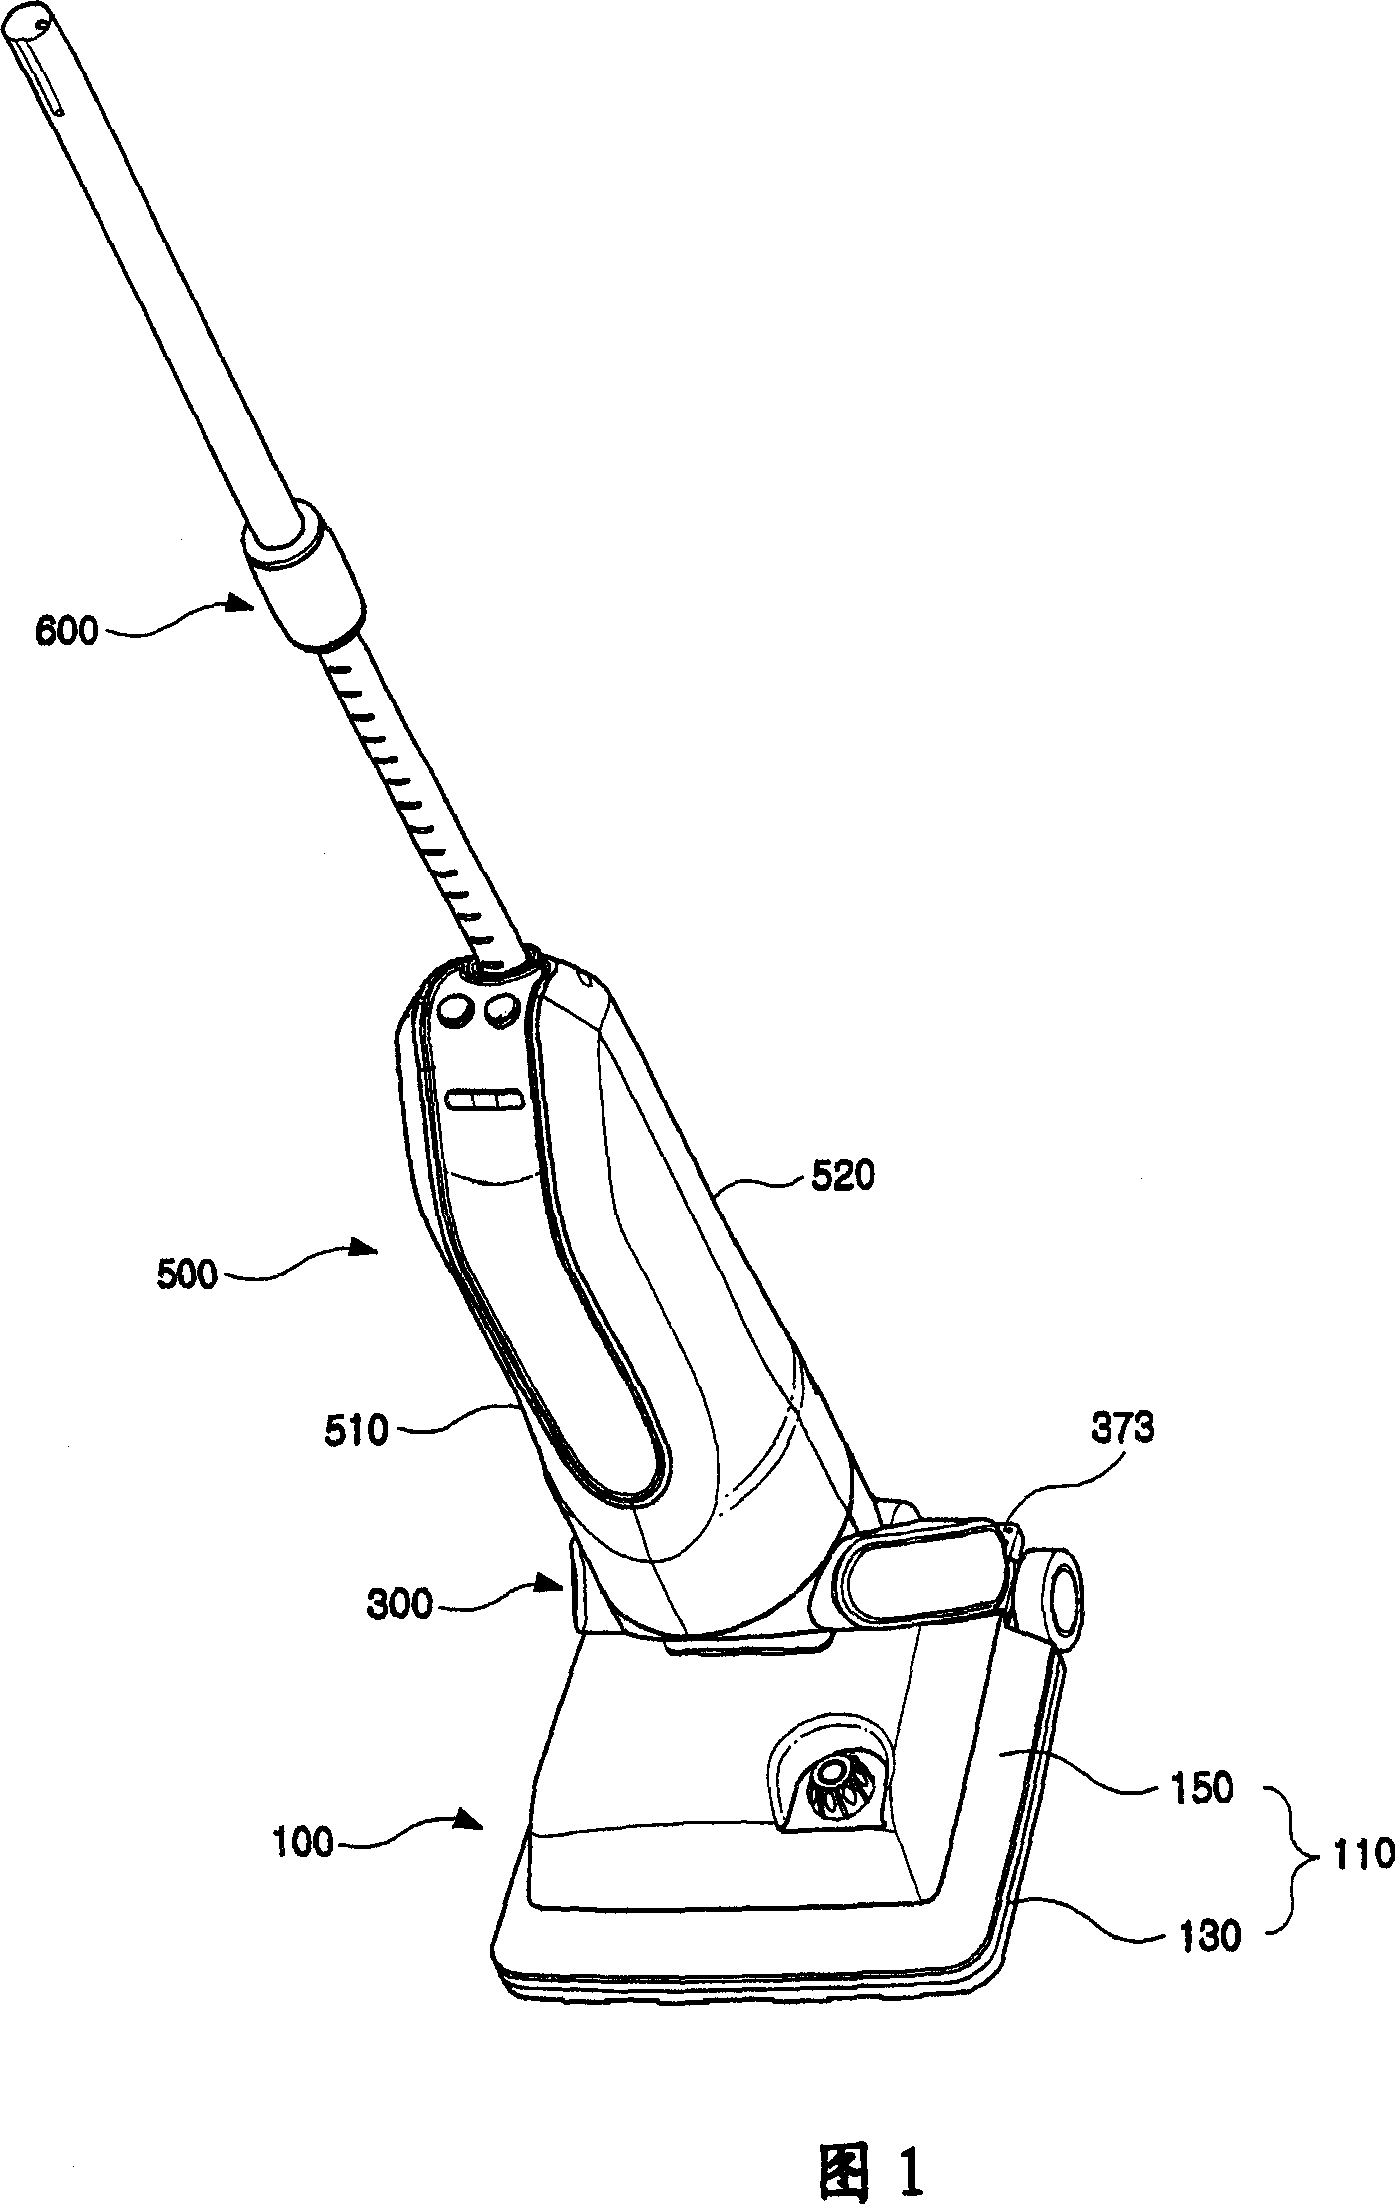 Dust collection box and steam vacuum cleaning machine using the same